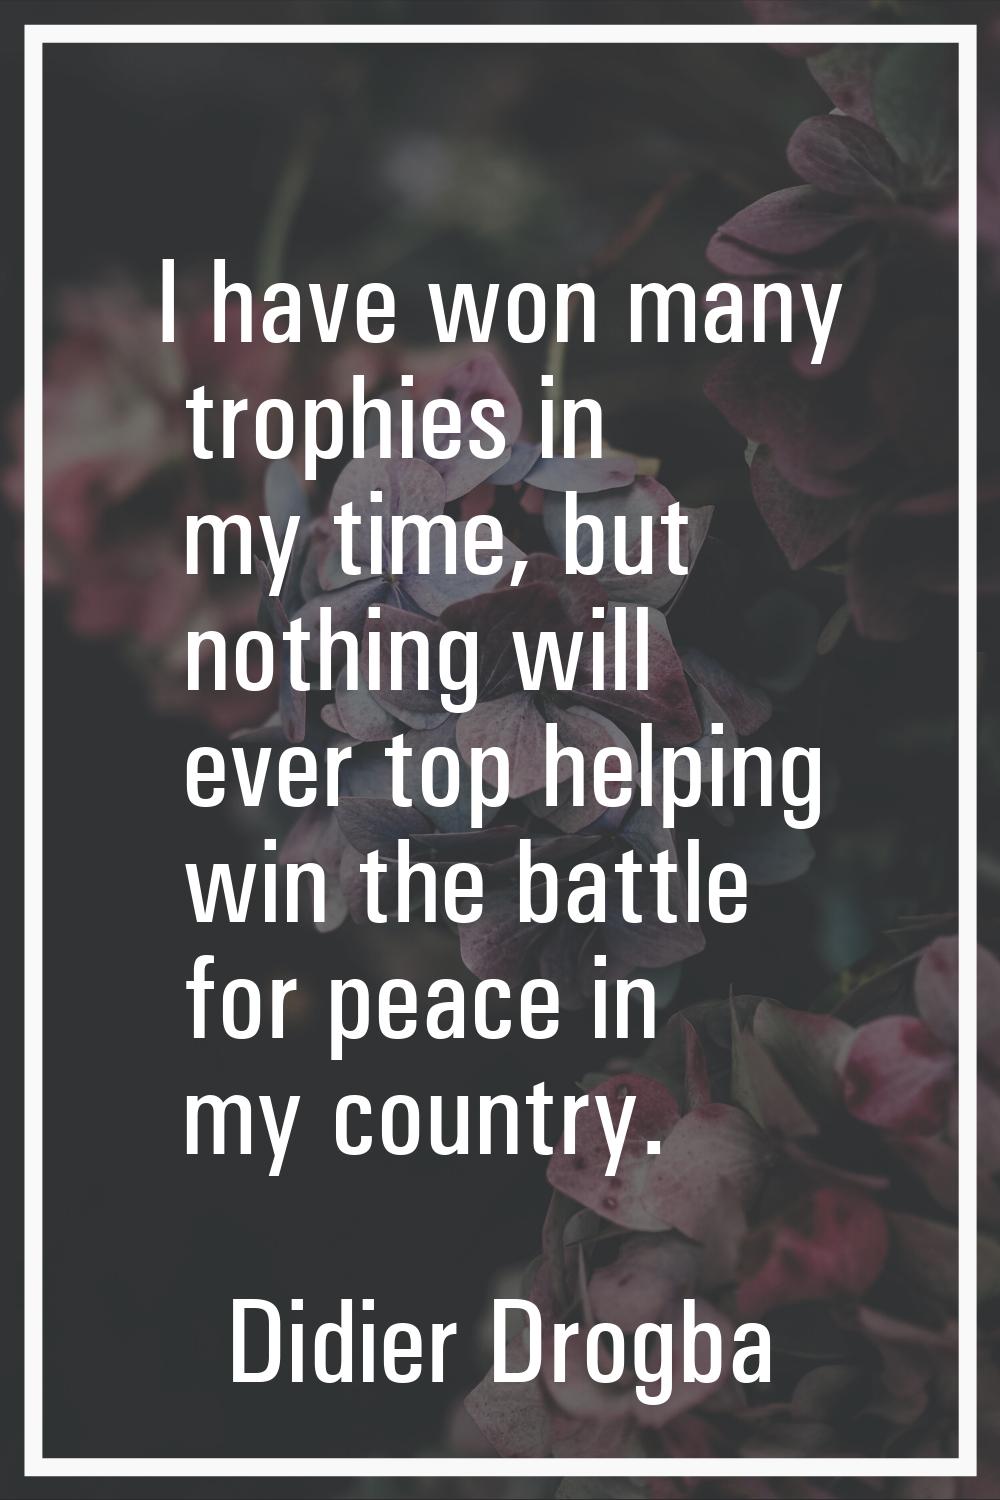 I have won many trophies in my time, but nothing will ever top helping win the battle for peace in 